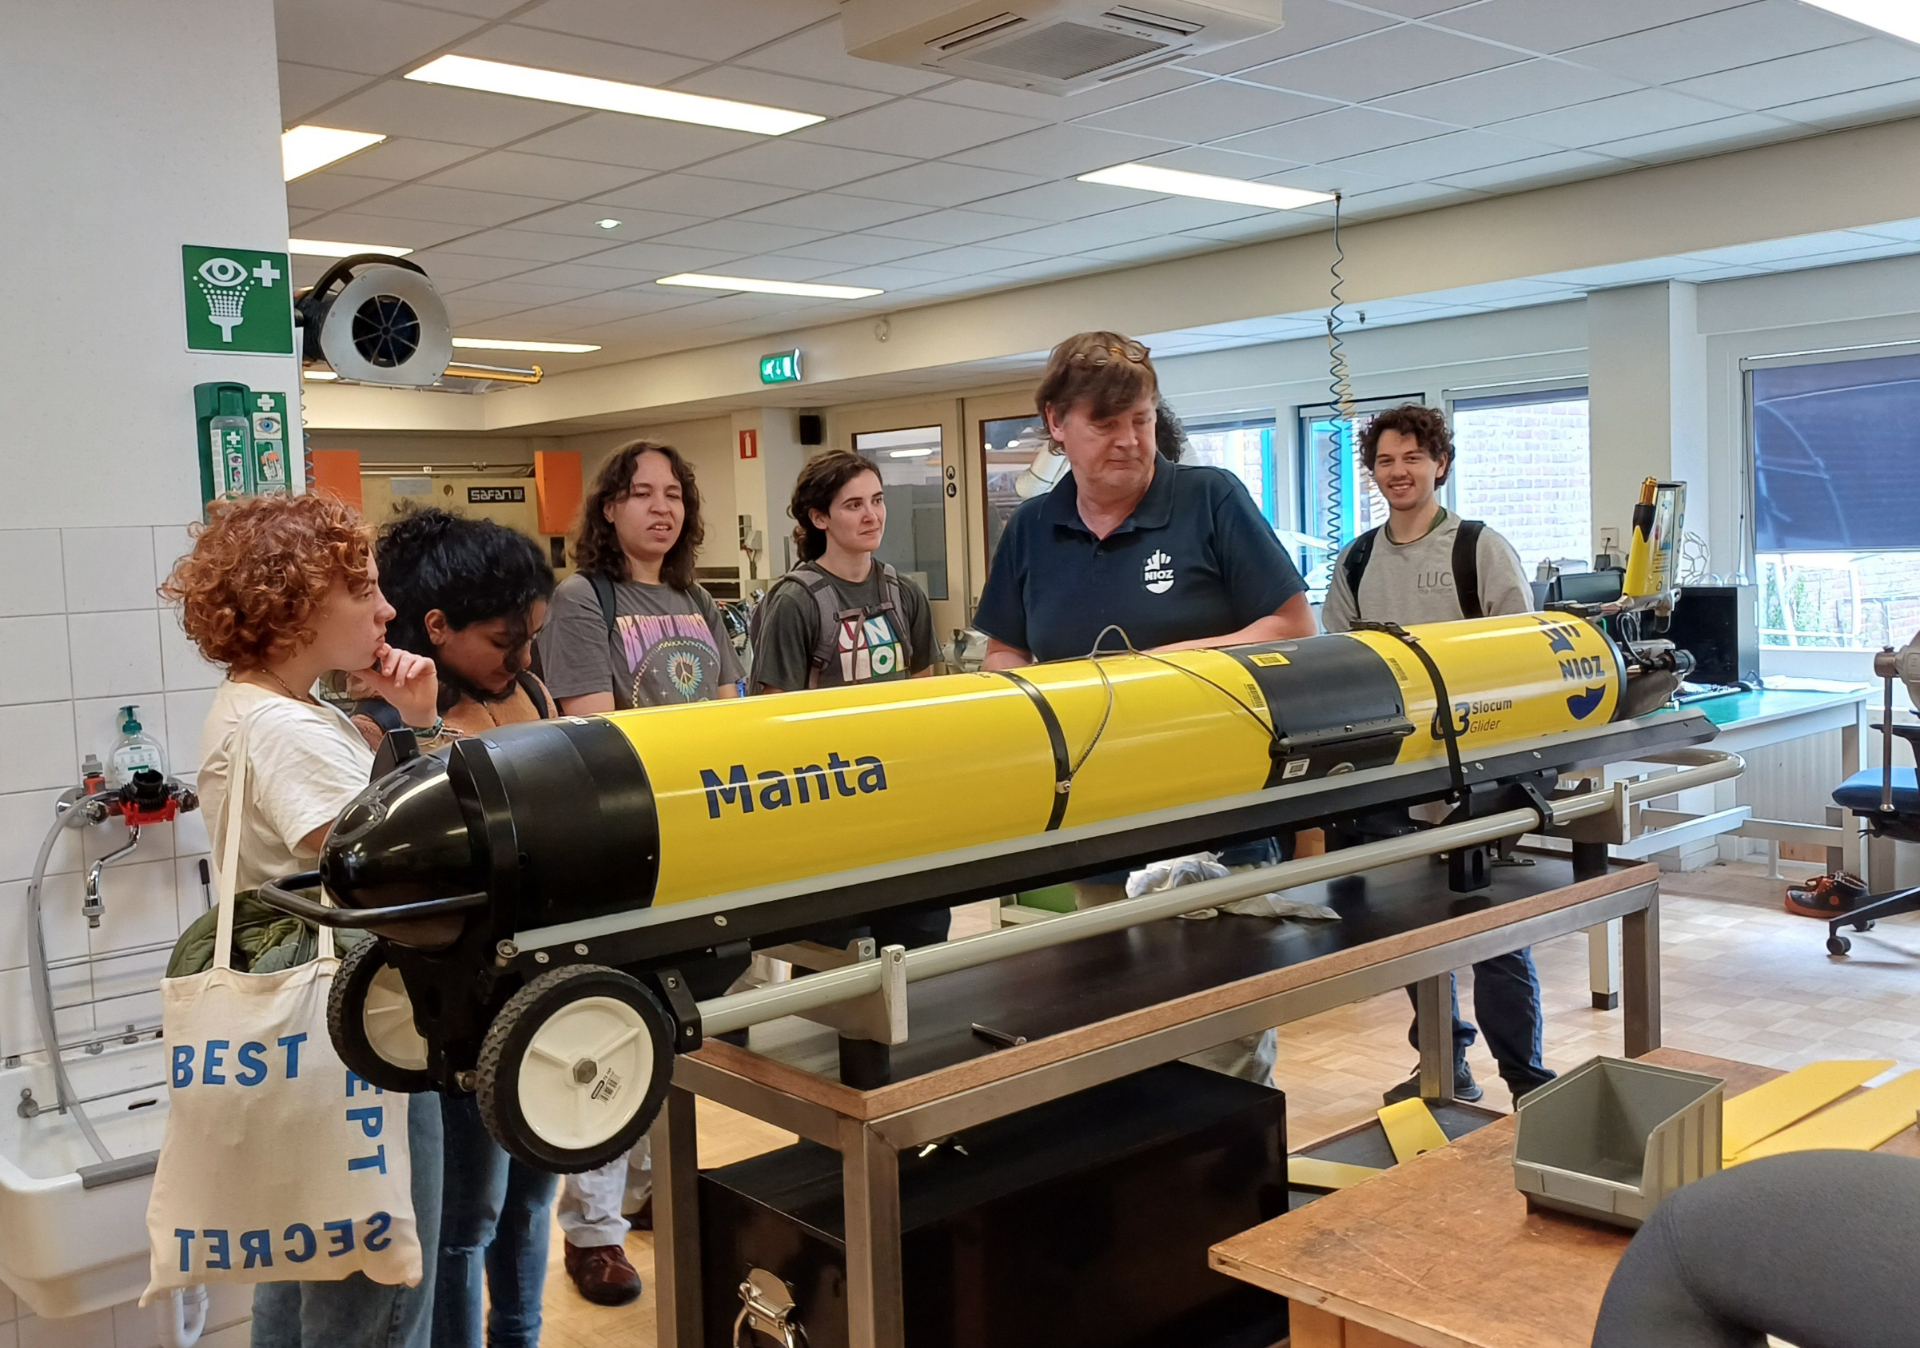 Edwin Keijzer, instrument maker at the National Marine Facilities, explains to some students how the glider works (Photo credits: Paulien Koster).